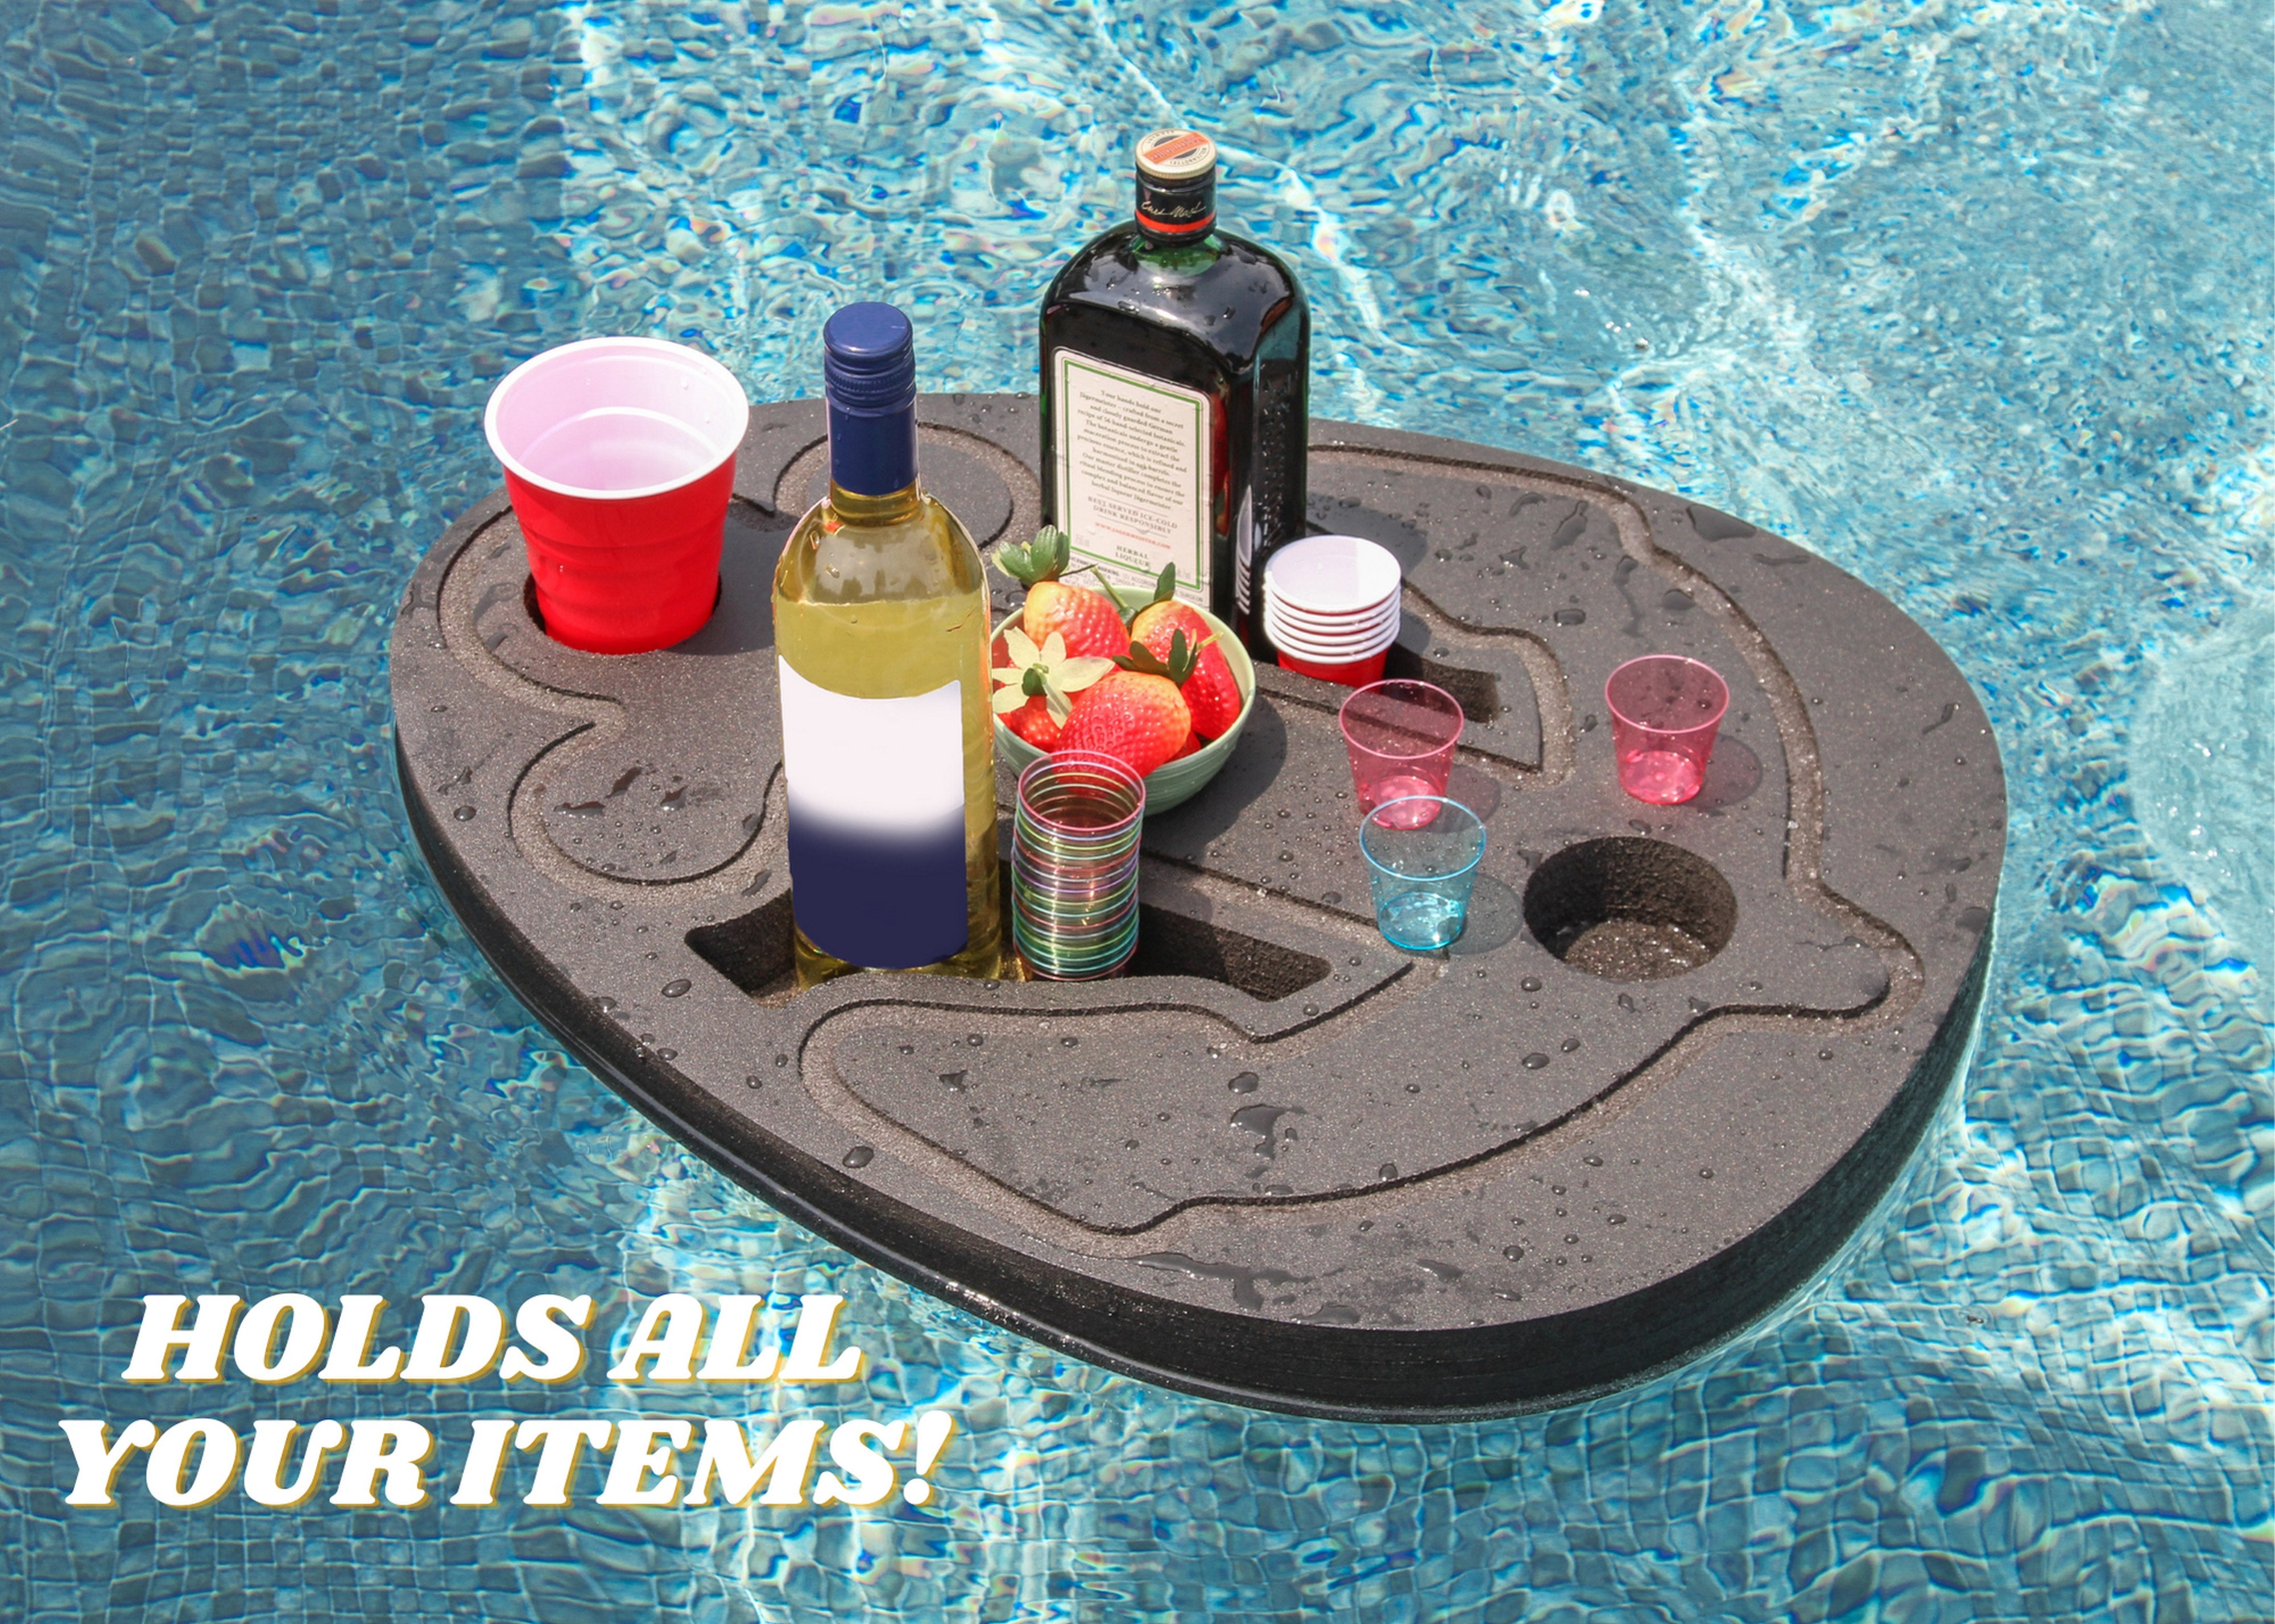 Floating Anchor Refreshment Tray Pool Float